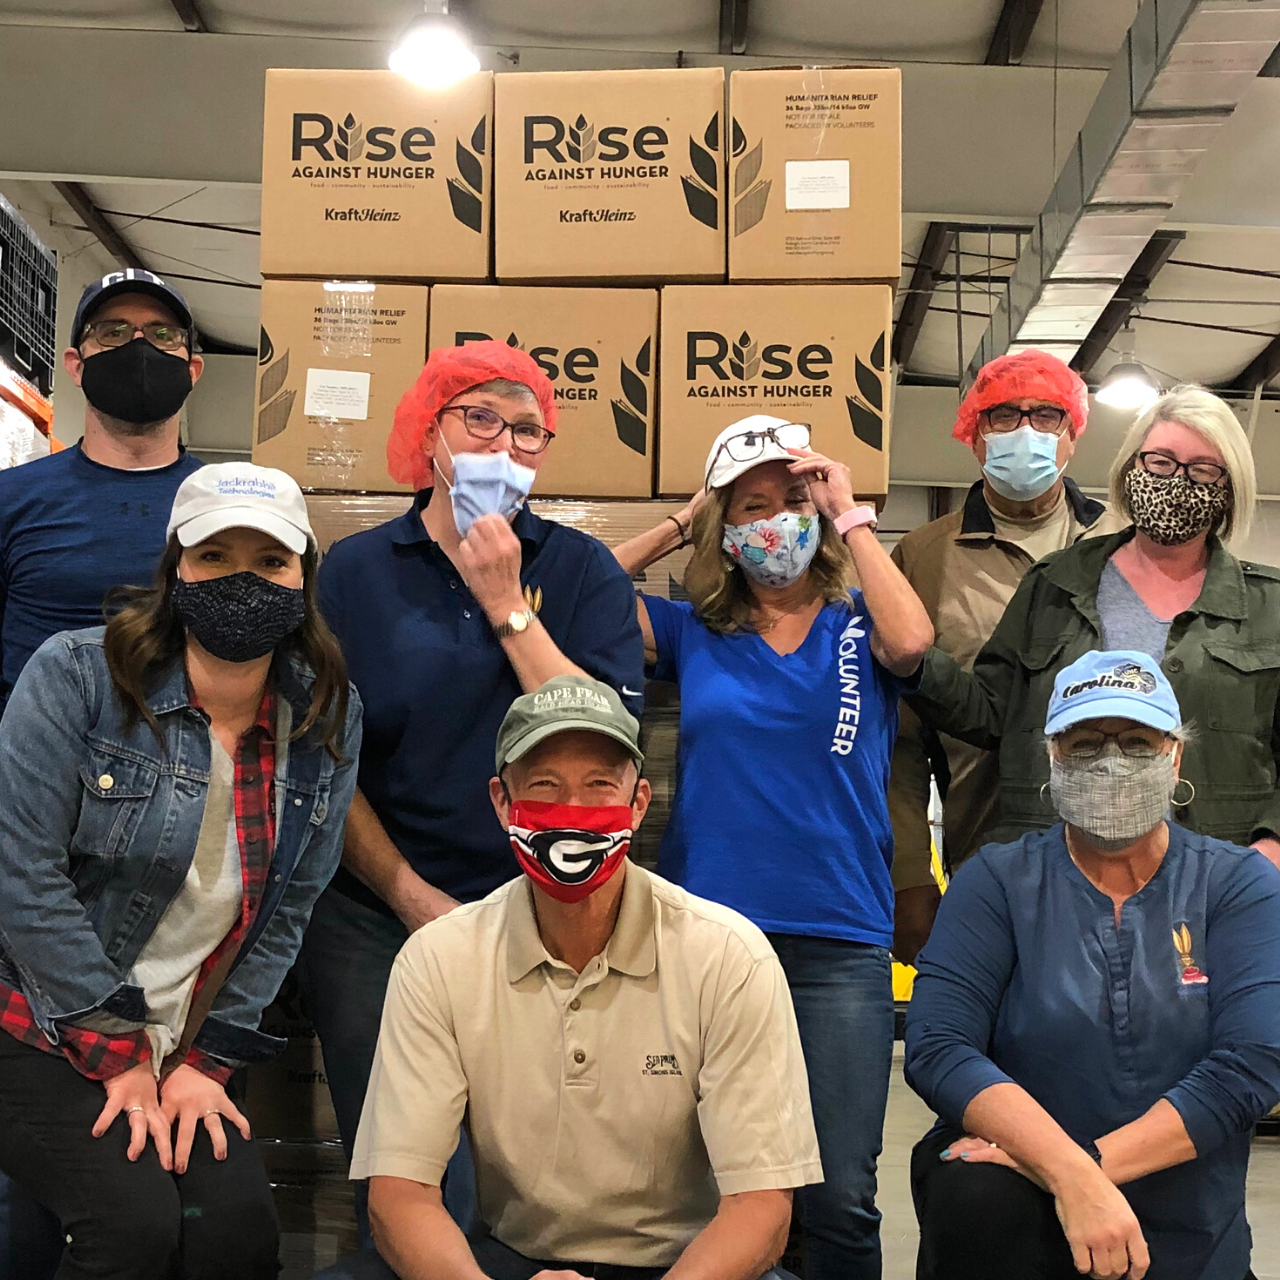 Jackrabbit Technologies and Rise Against Hunger Work to Feed the Hungry